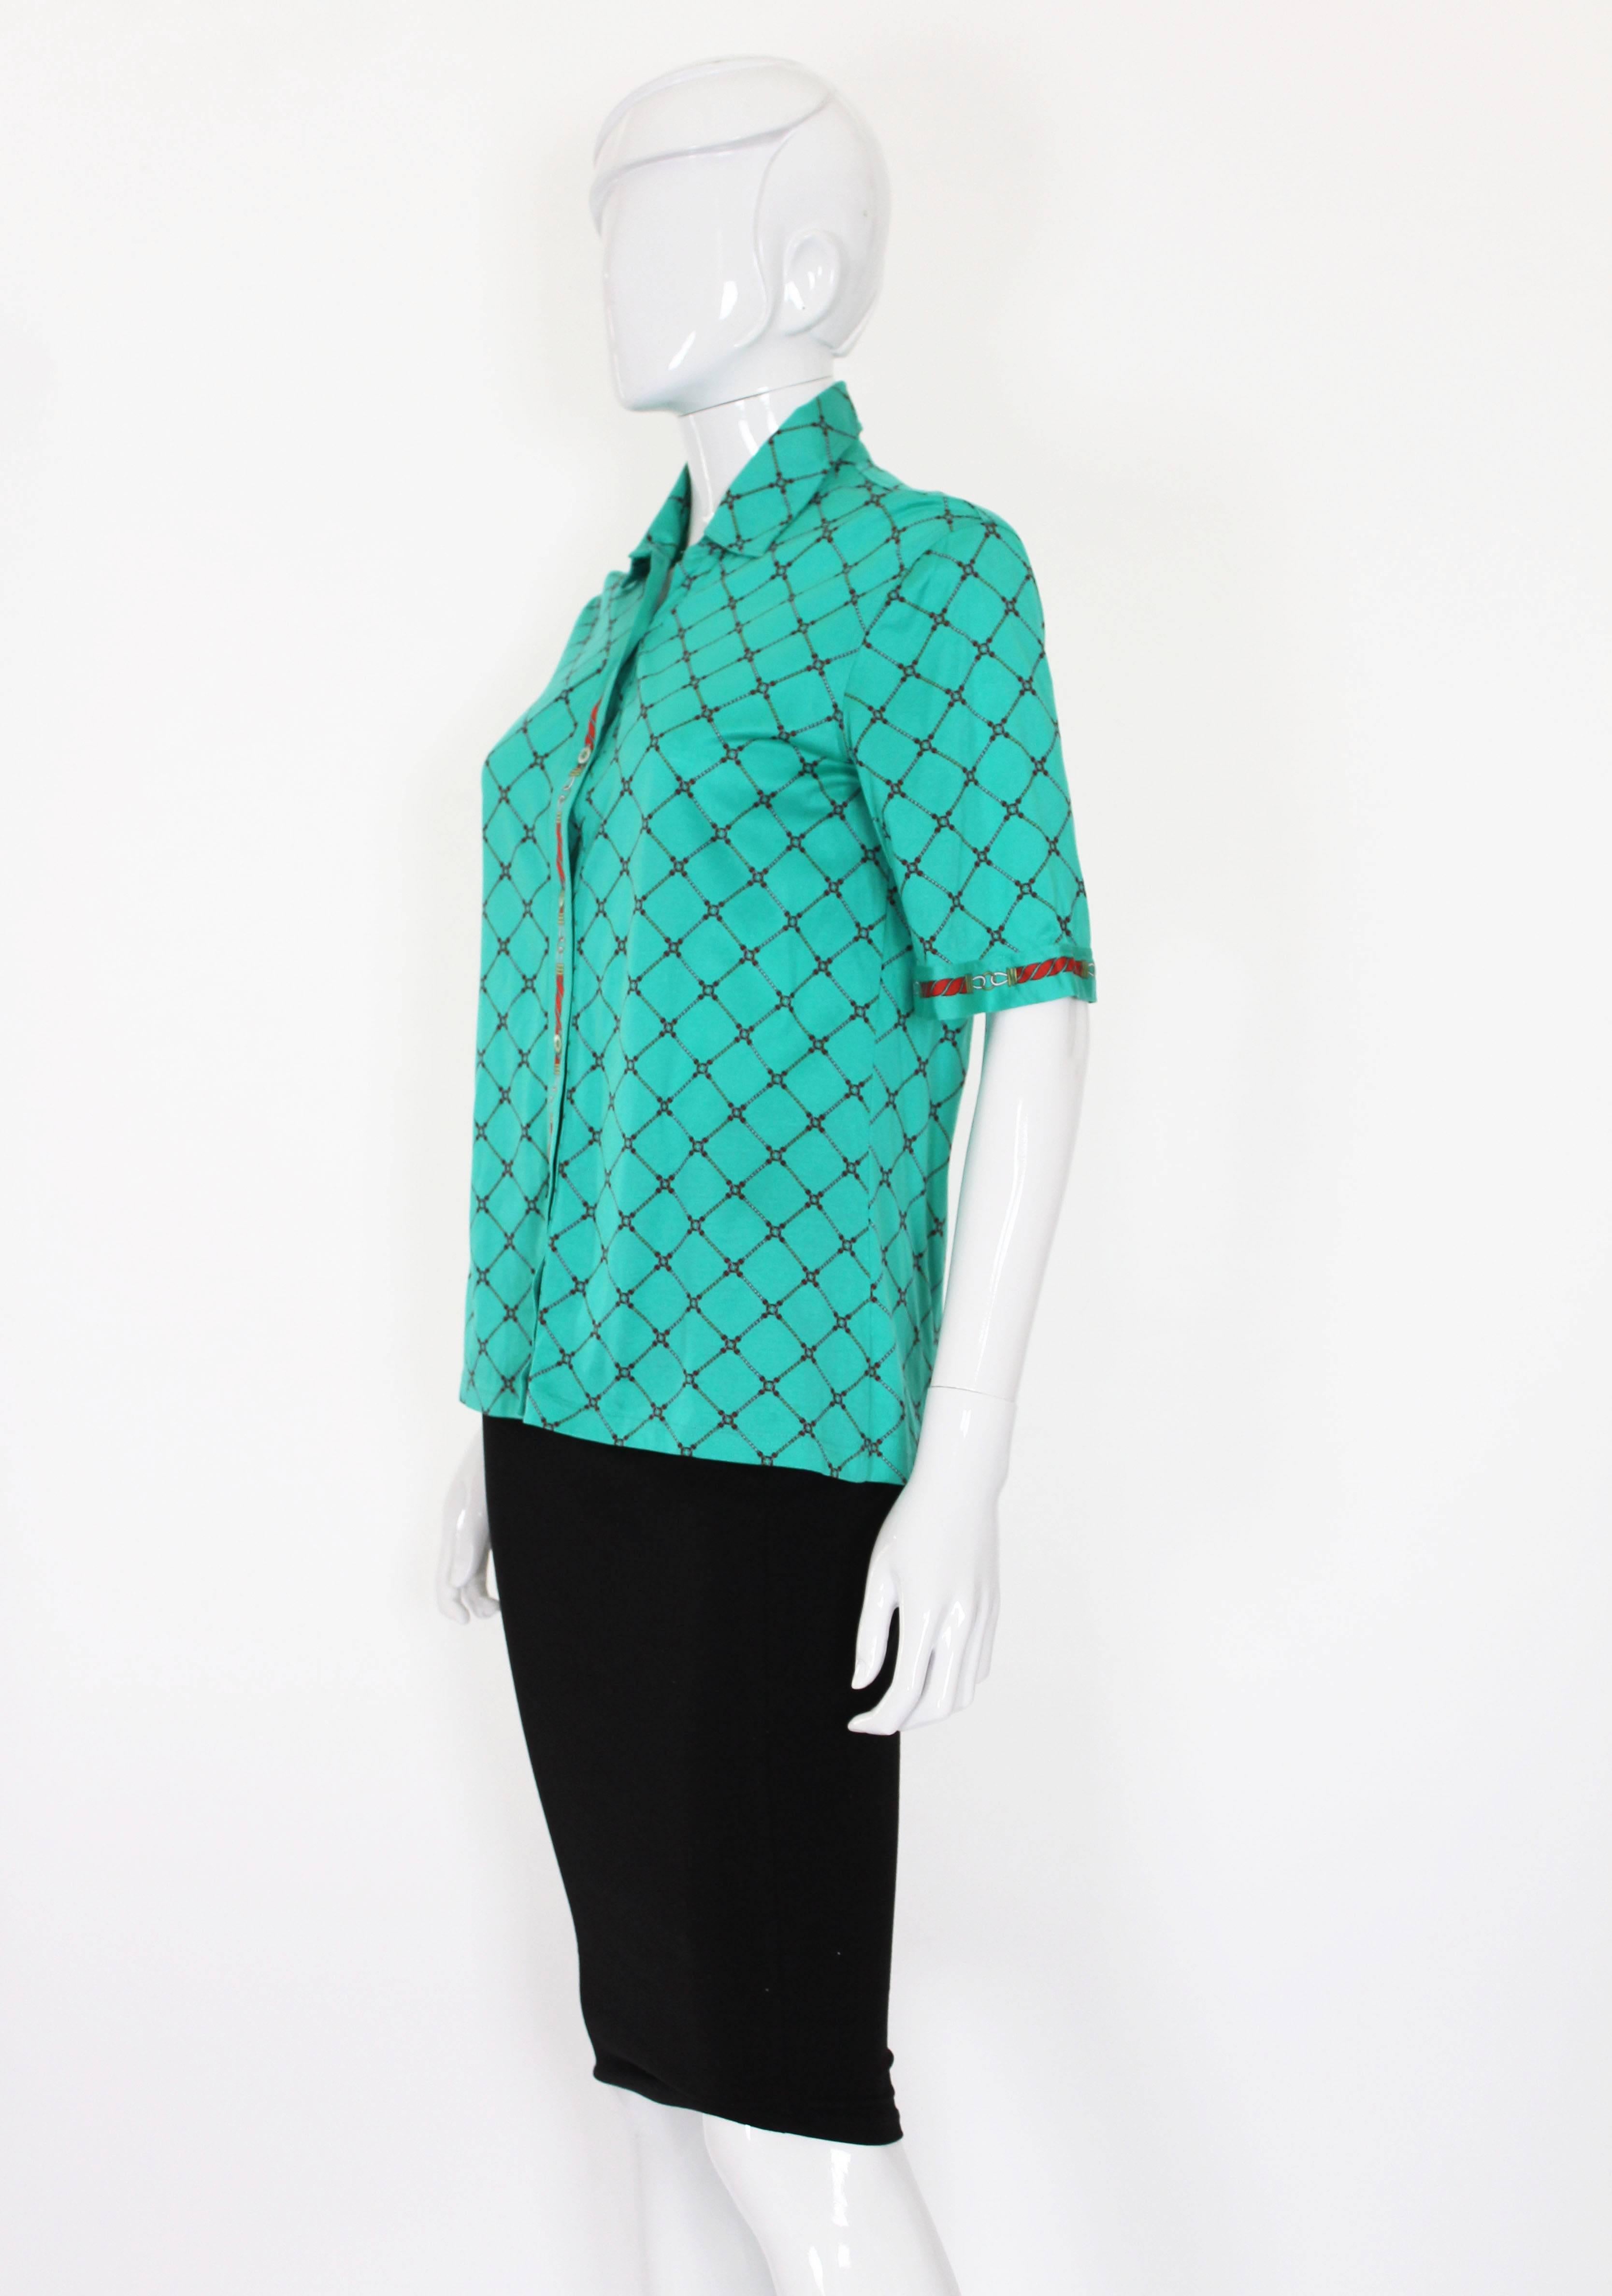 A classic short sleeve shirt by French house ,Celine , Paris.
This shirt is a wonderful green colour with  a rope print design on the body and cuffs. It is 100% cotton, and the buttons are stamped Celine.